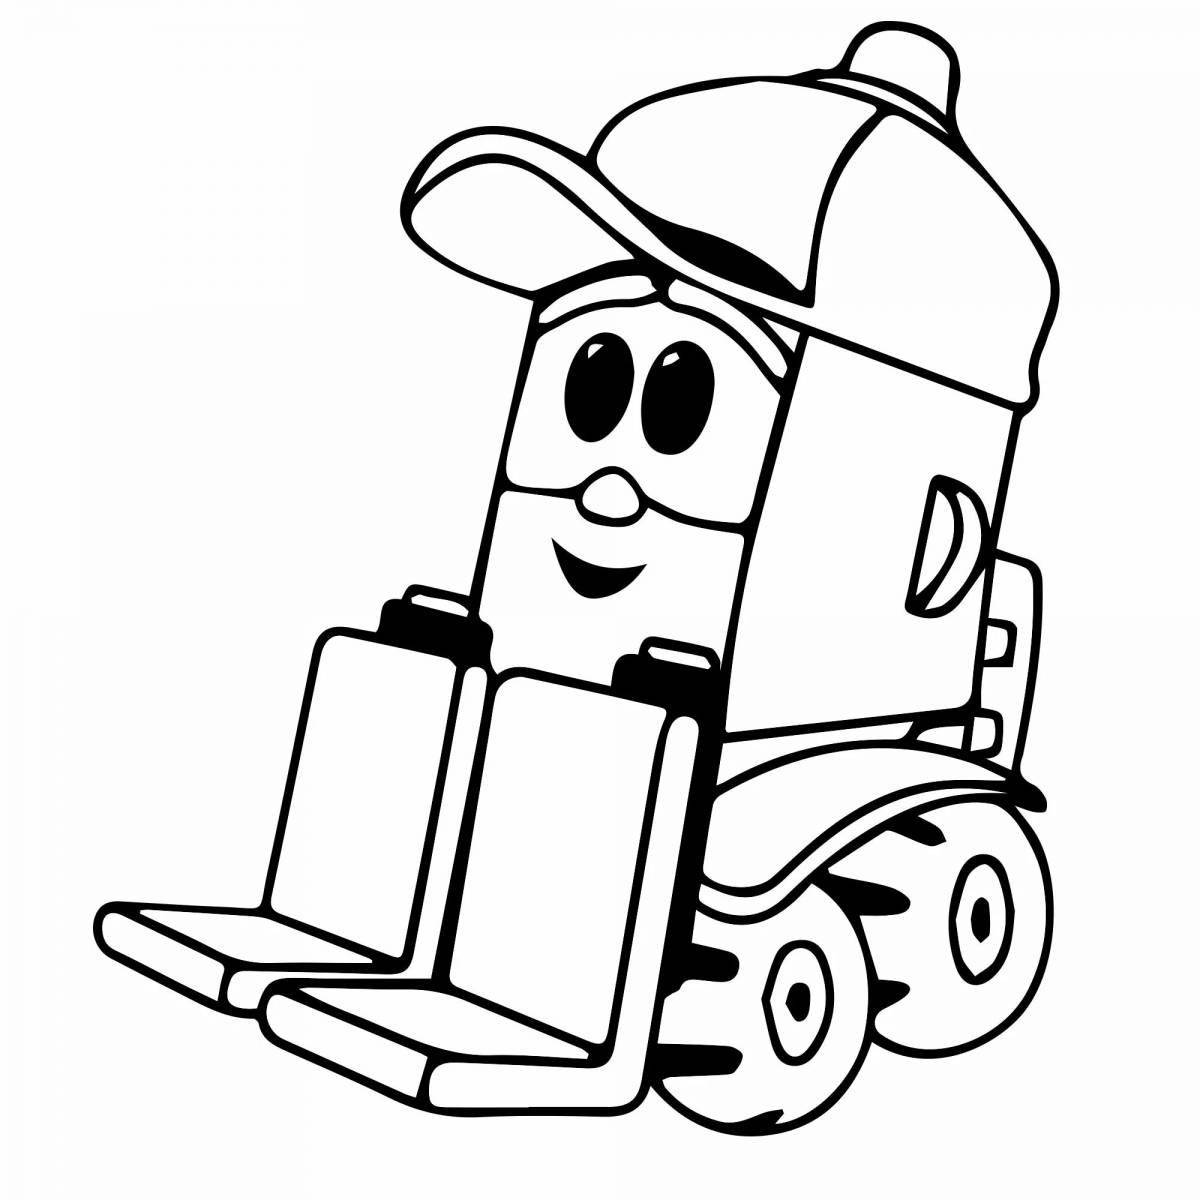 Smooth truck coloring page